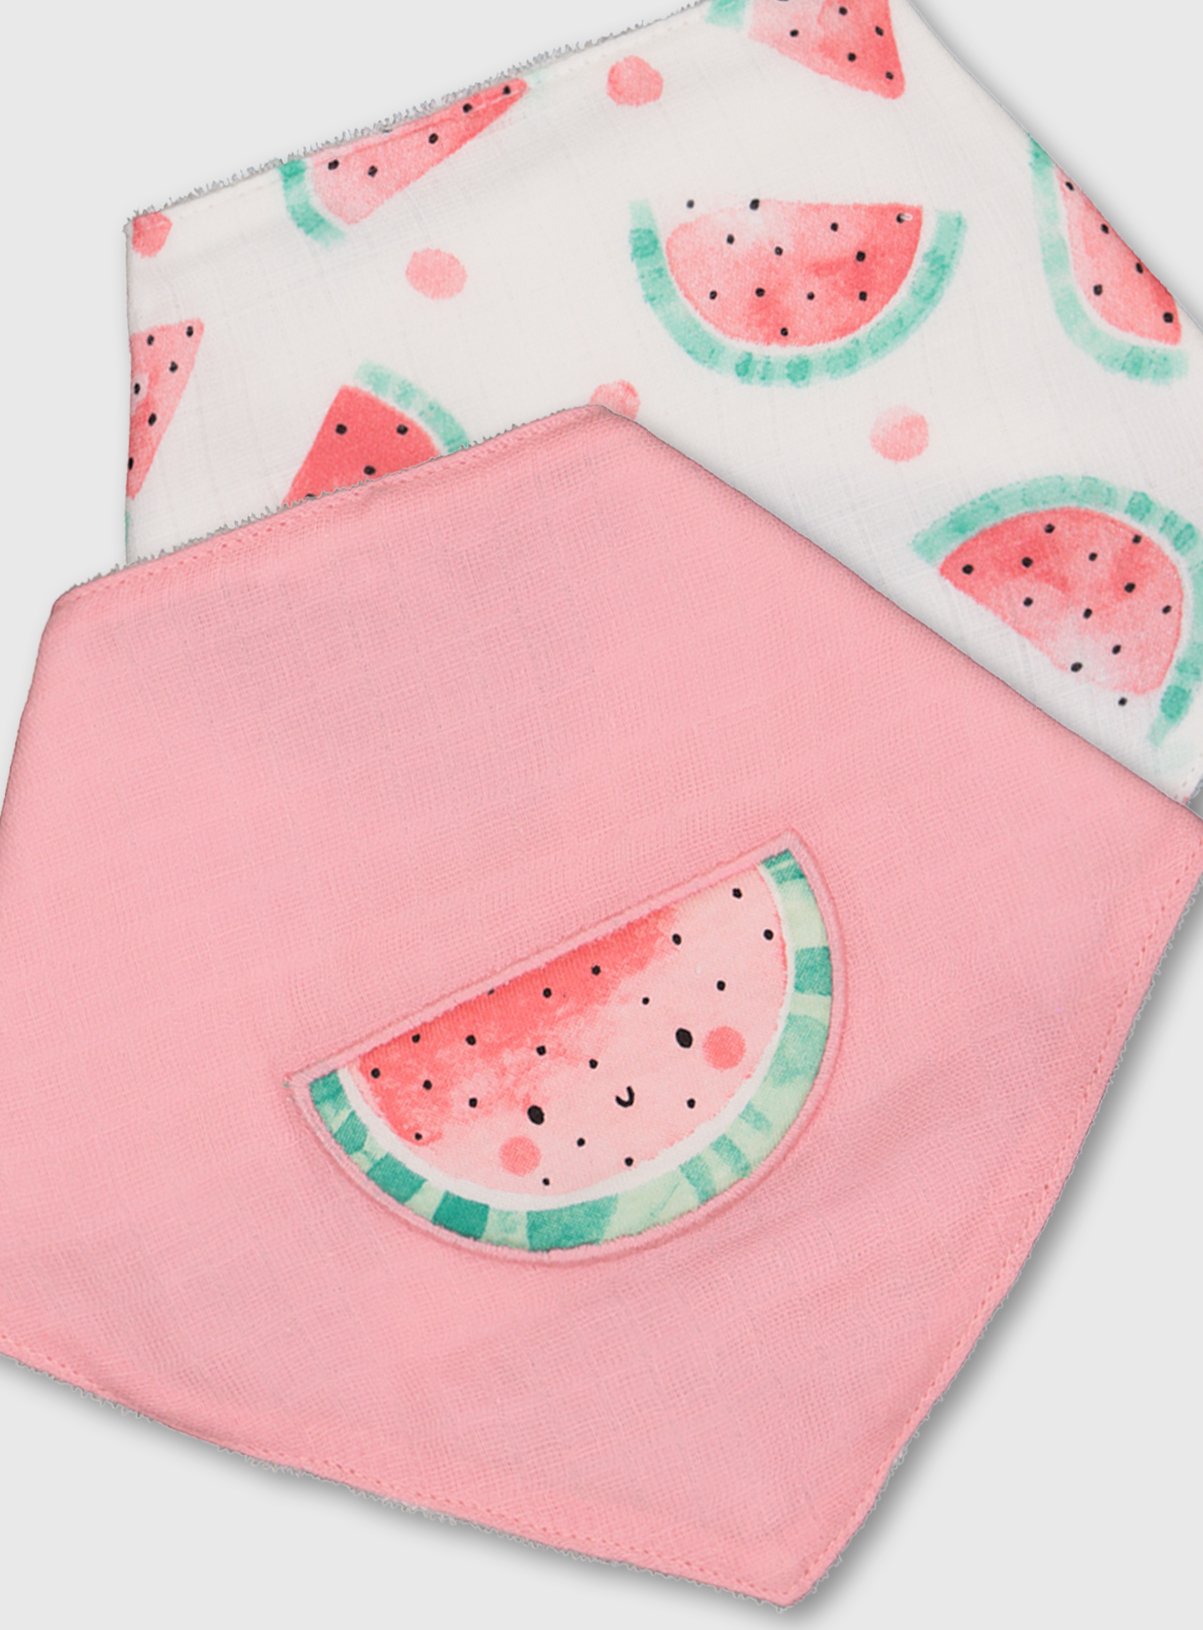 Pink & White Watermelon Hanky Bibs 2 Pack Review